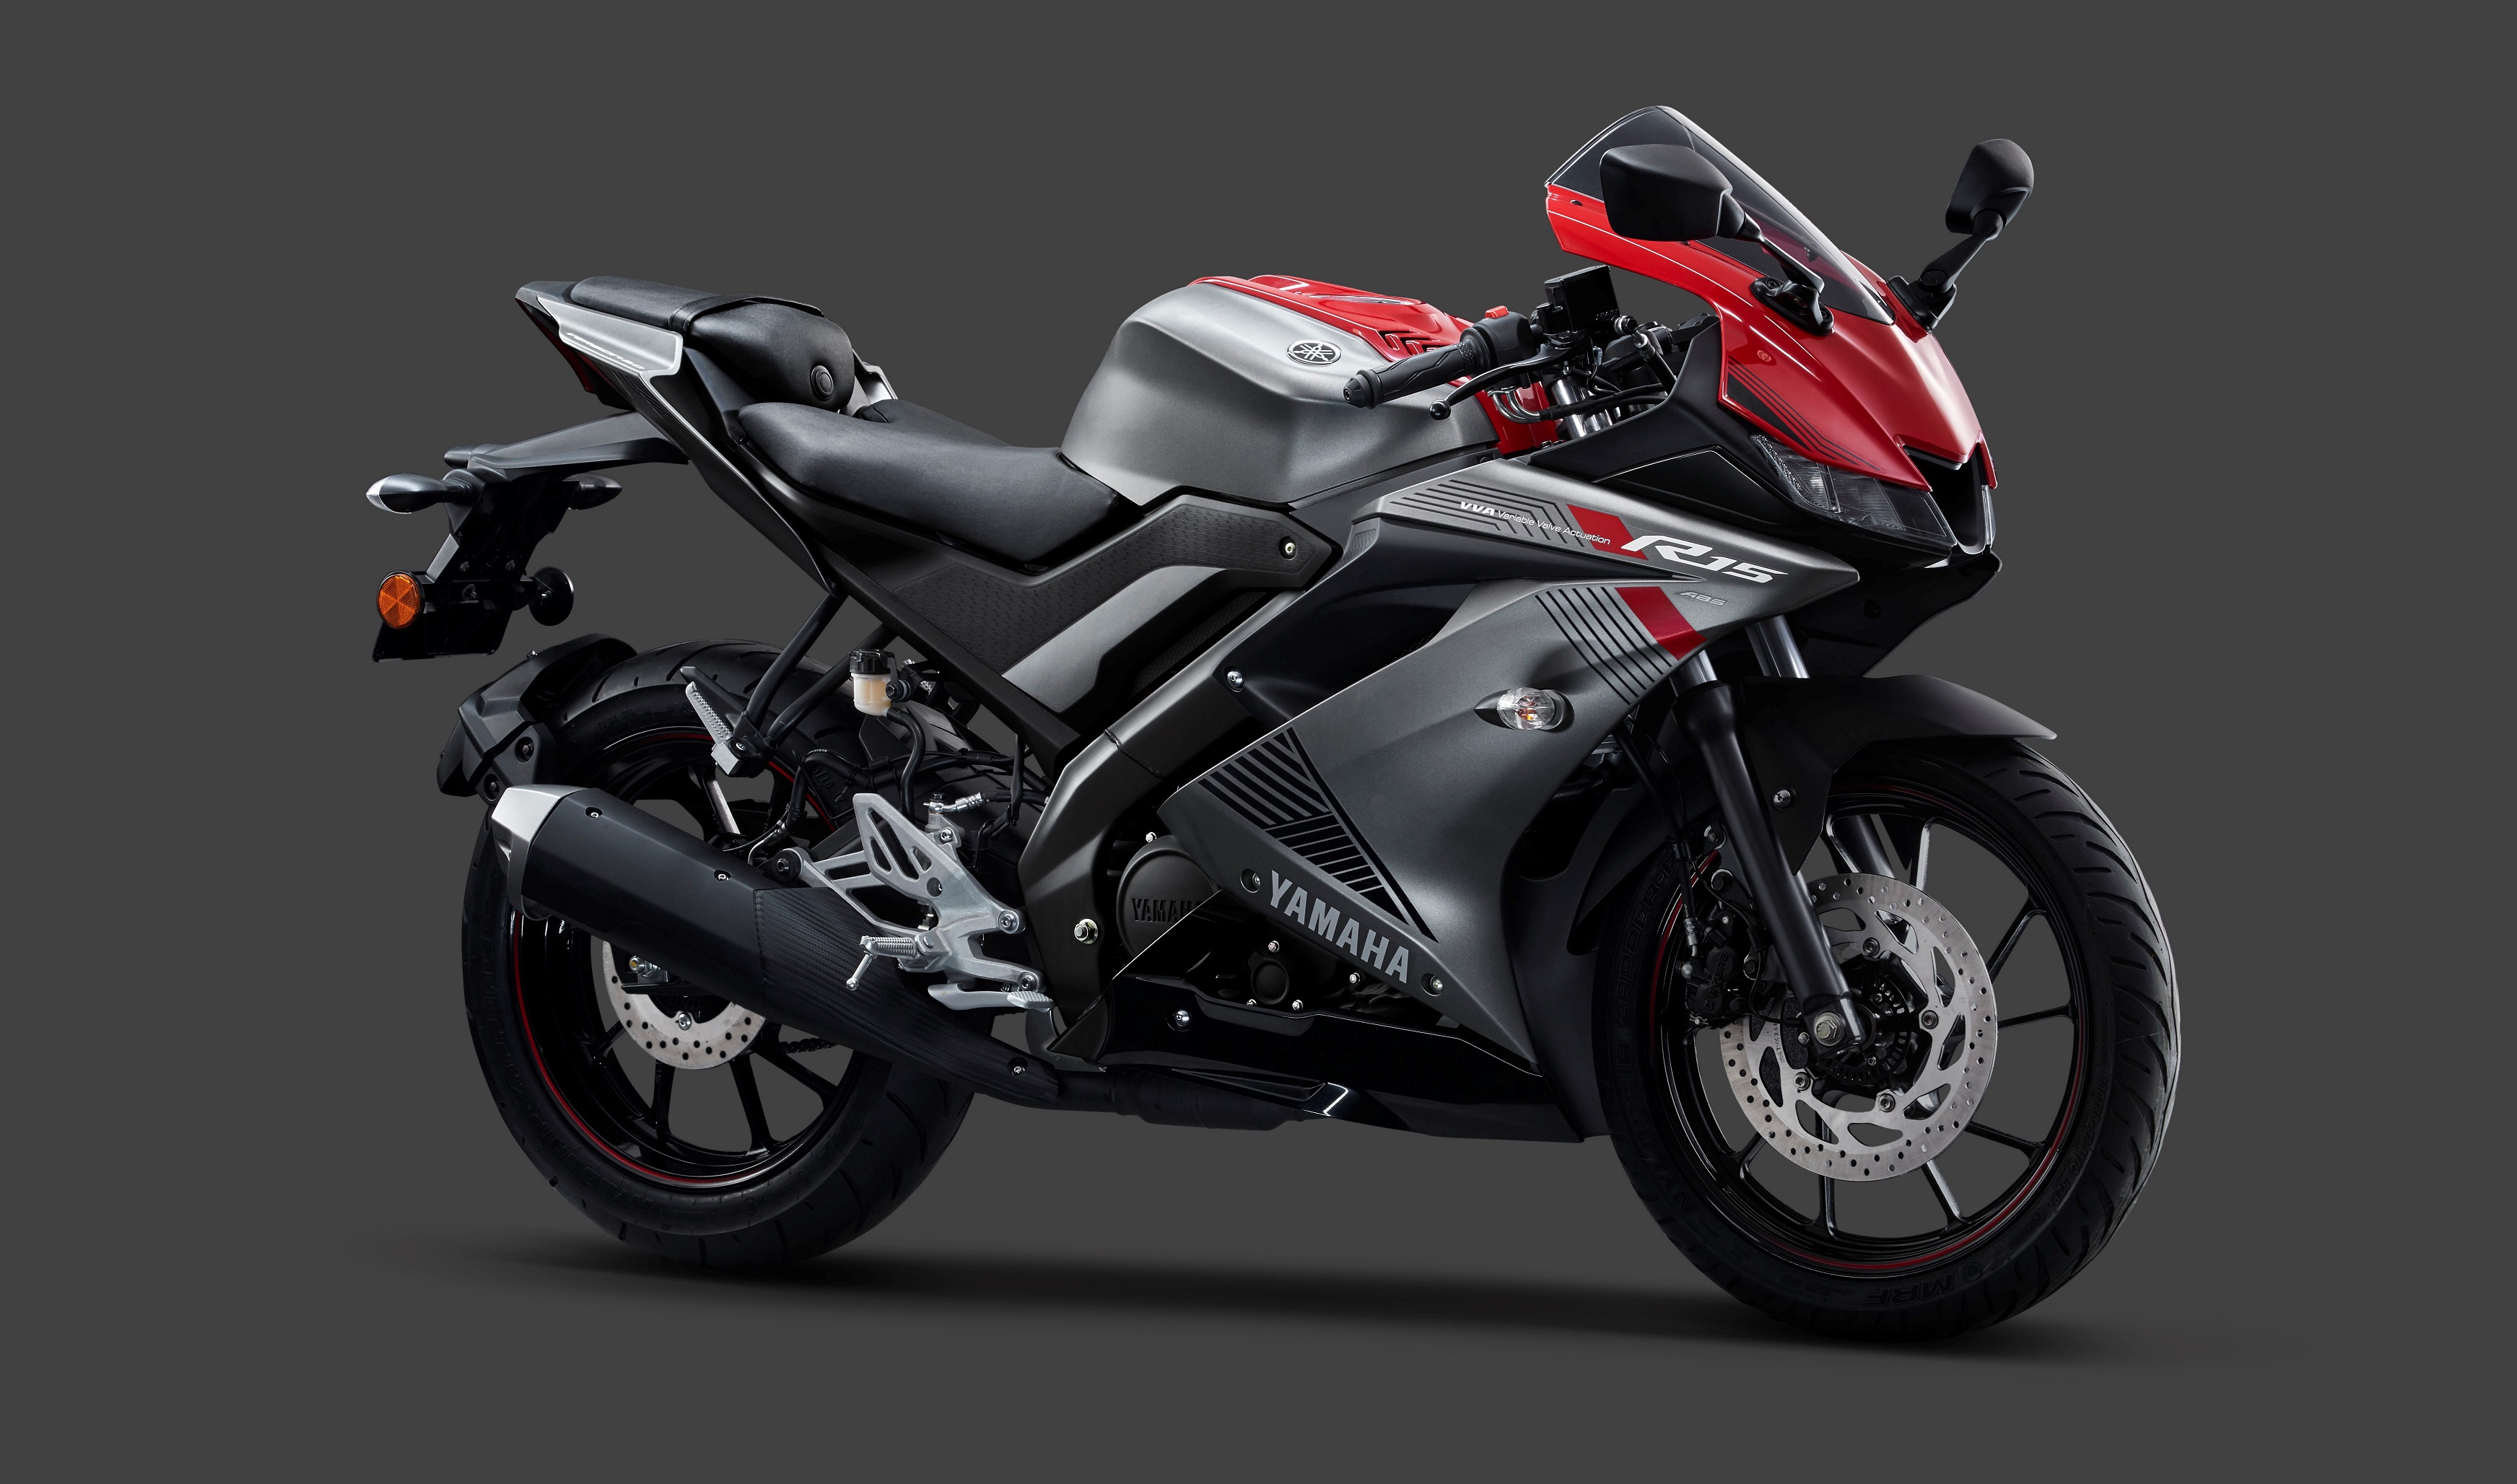 Yamaha R15 V3.0 ABS Launched In India At INR 1.39 Lakh, Now Available ...